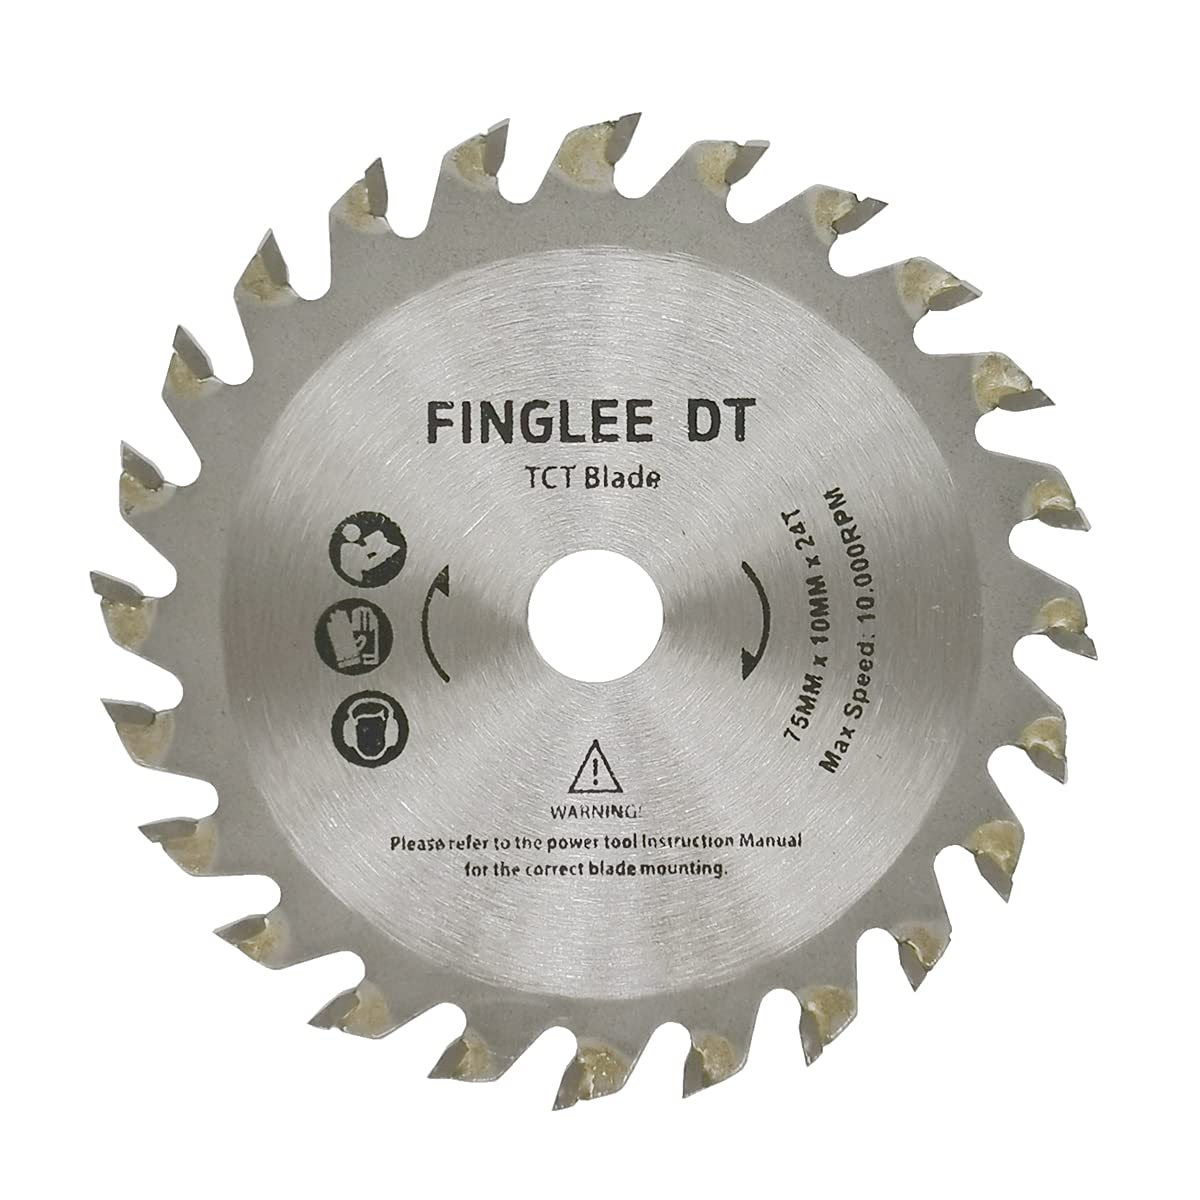 Generic FINGLEE DT 3 inch Circular Saw Blade,24 Segments TCT Cutting Disc for Wood Plastic Composite Objects 76mm (1)